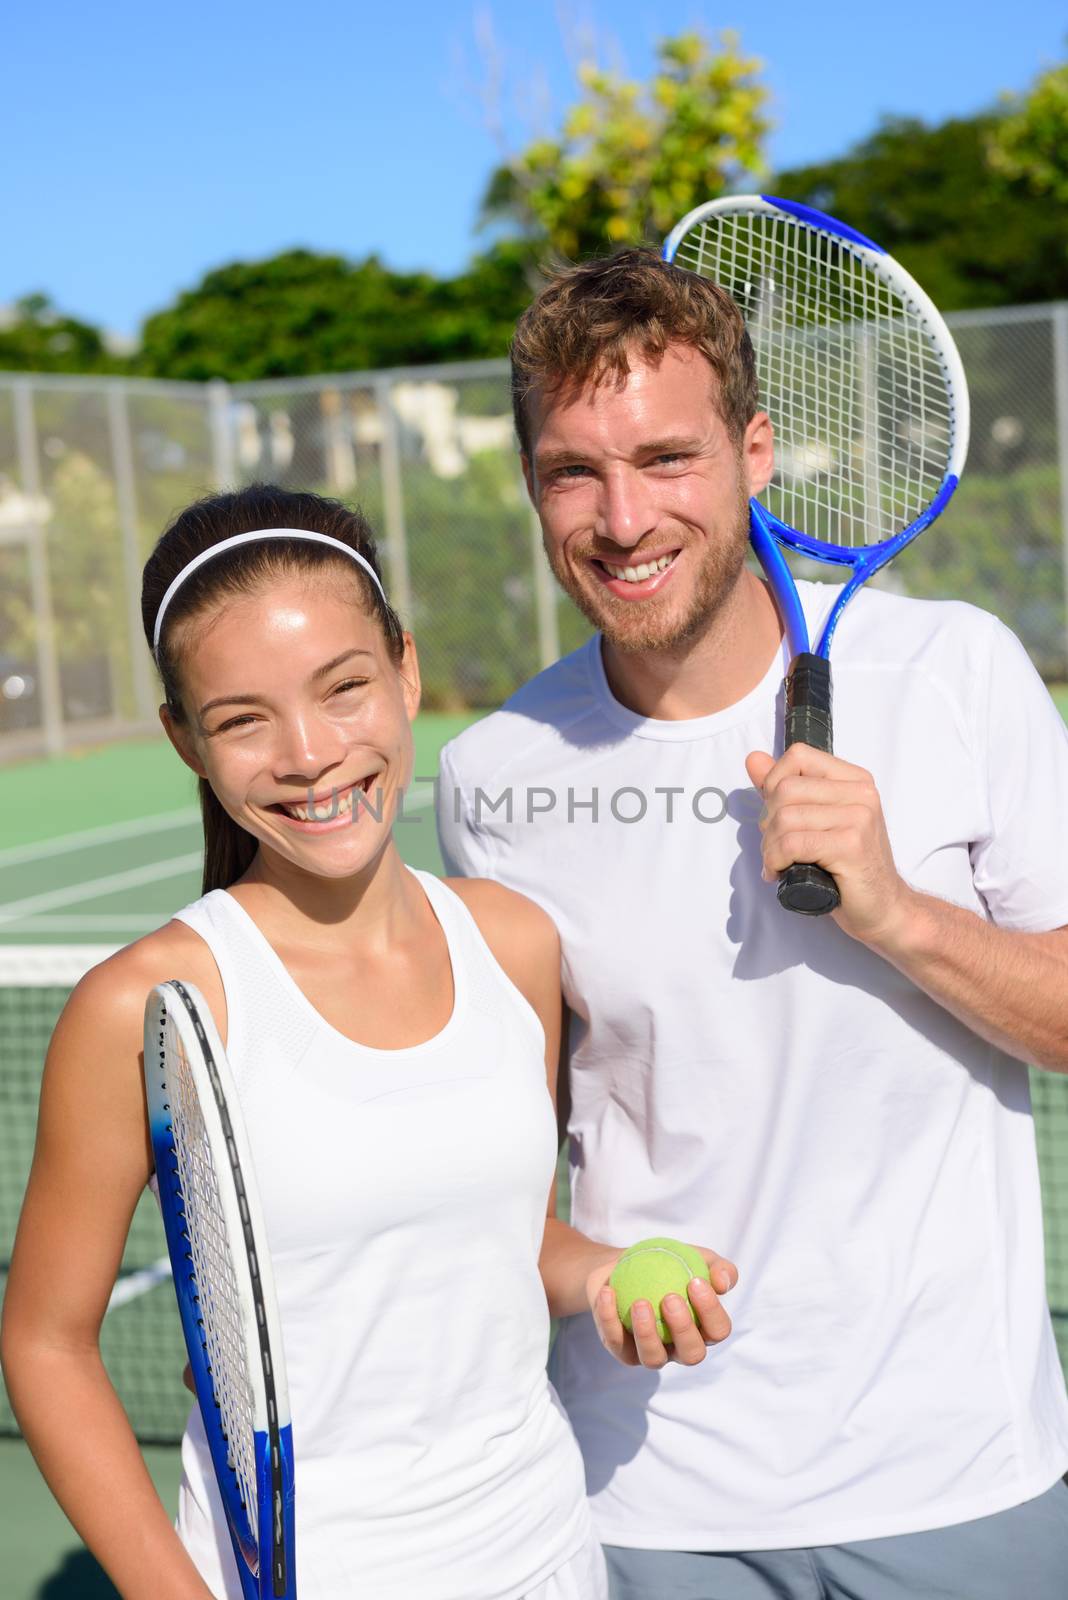 Tennis sport - Mixed doubles couple players portrait relaxing after playing game outside in summer. Happy smiling people on outdoor tennis court living healthy active lifestyle. Woman and man athletes